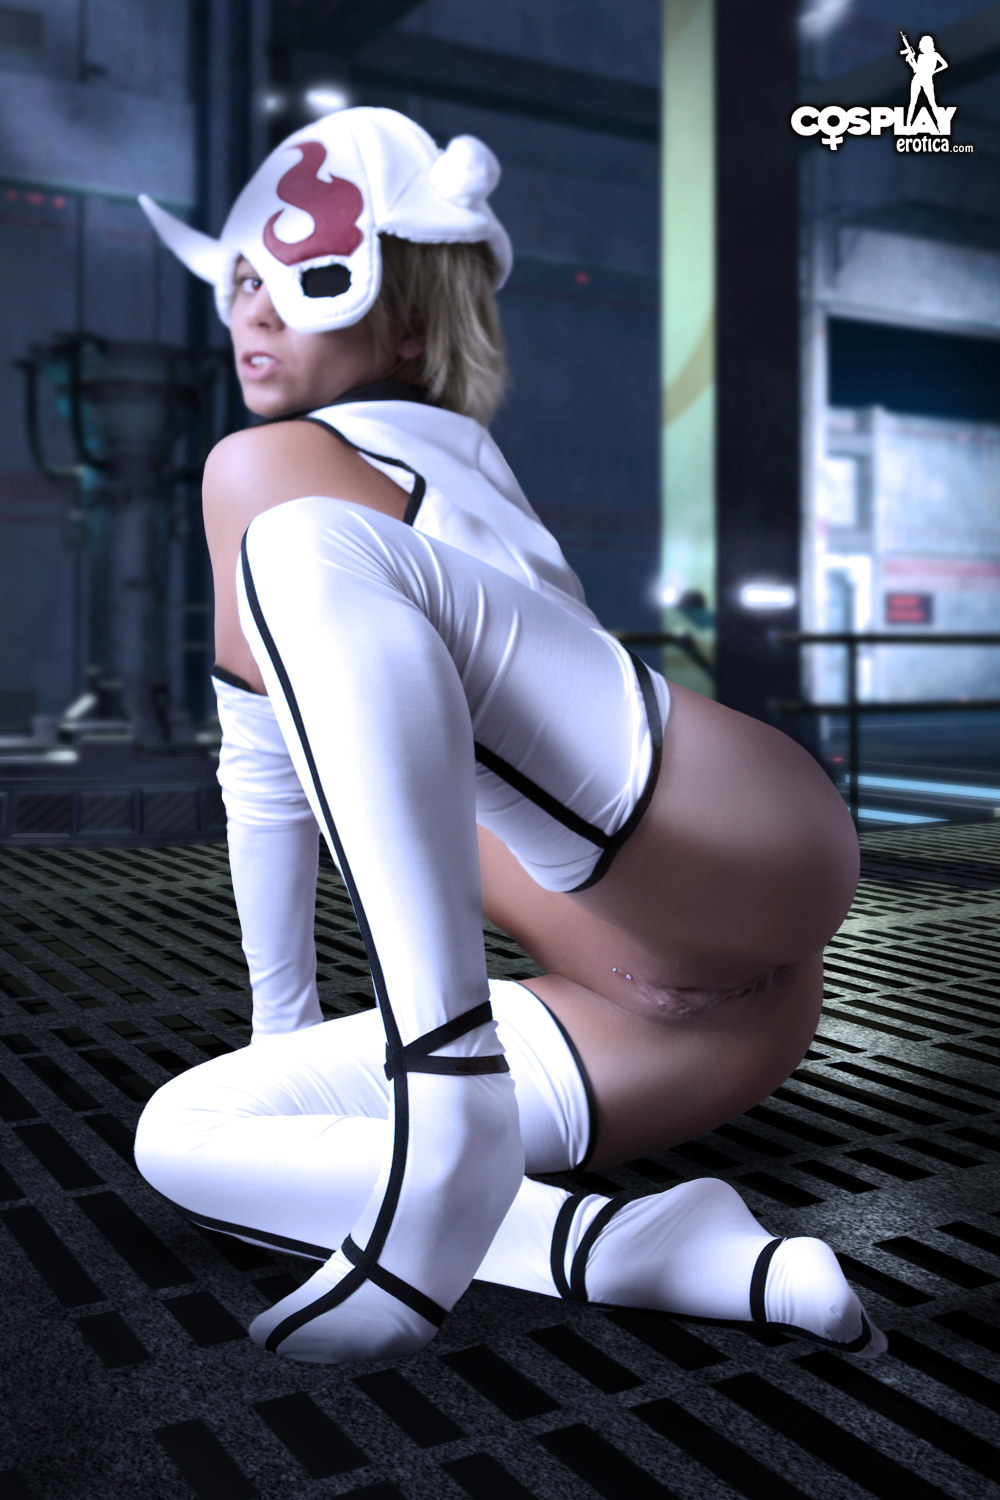 Melane - The Cutest Arrancar shows free gallery picture 35-35